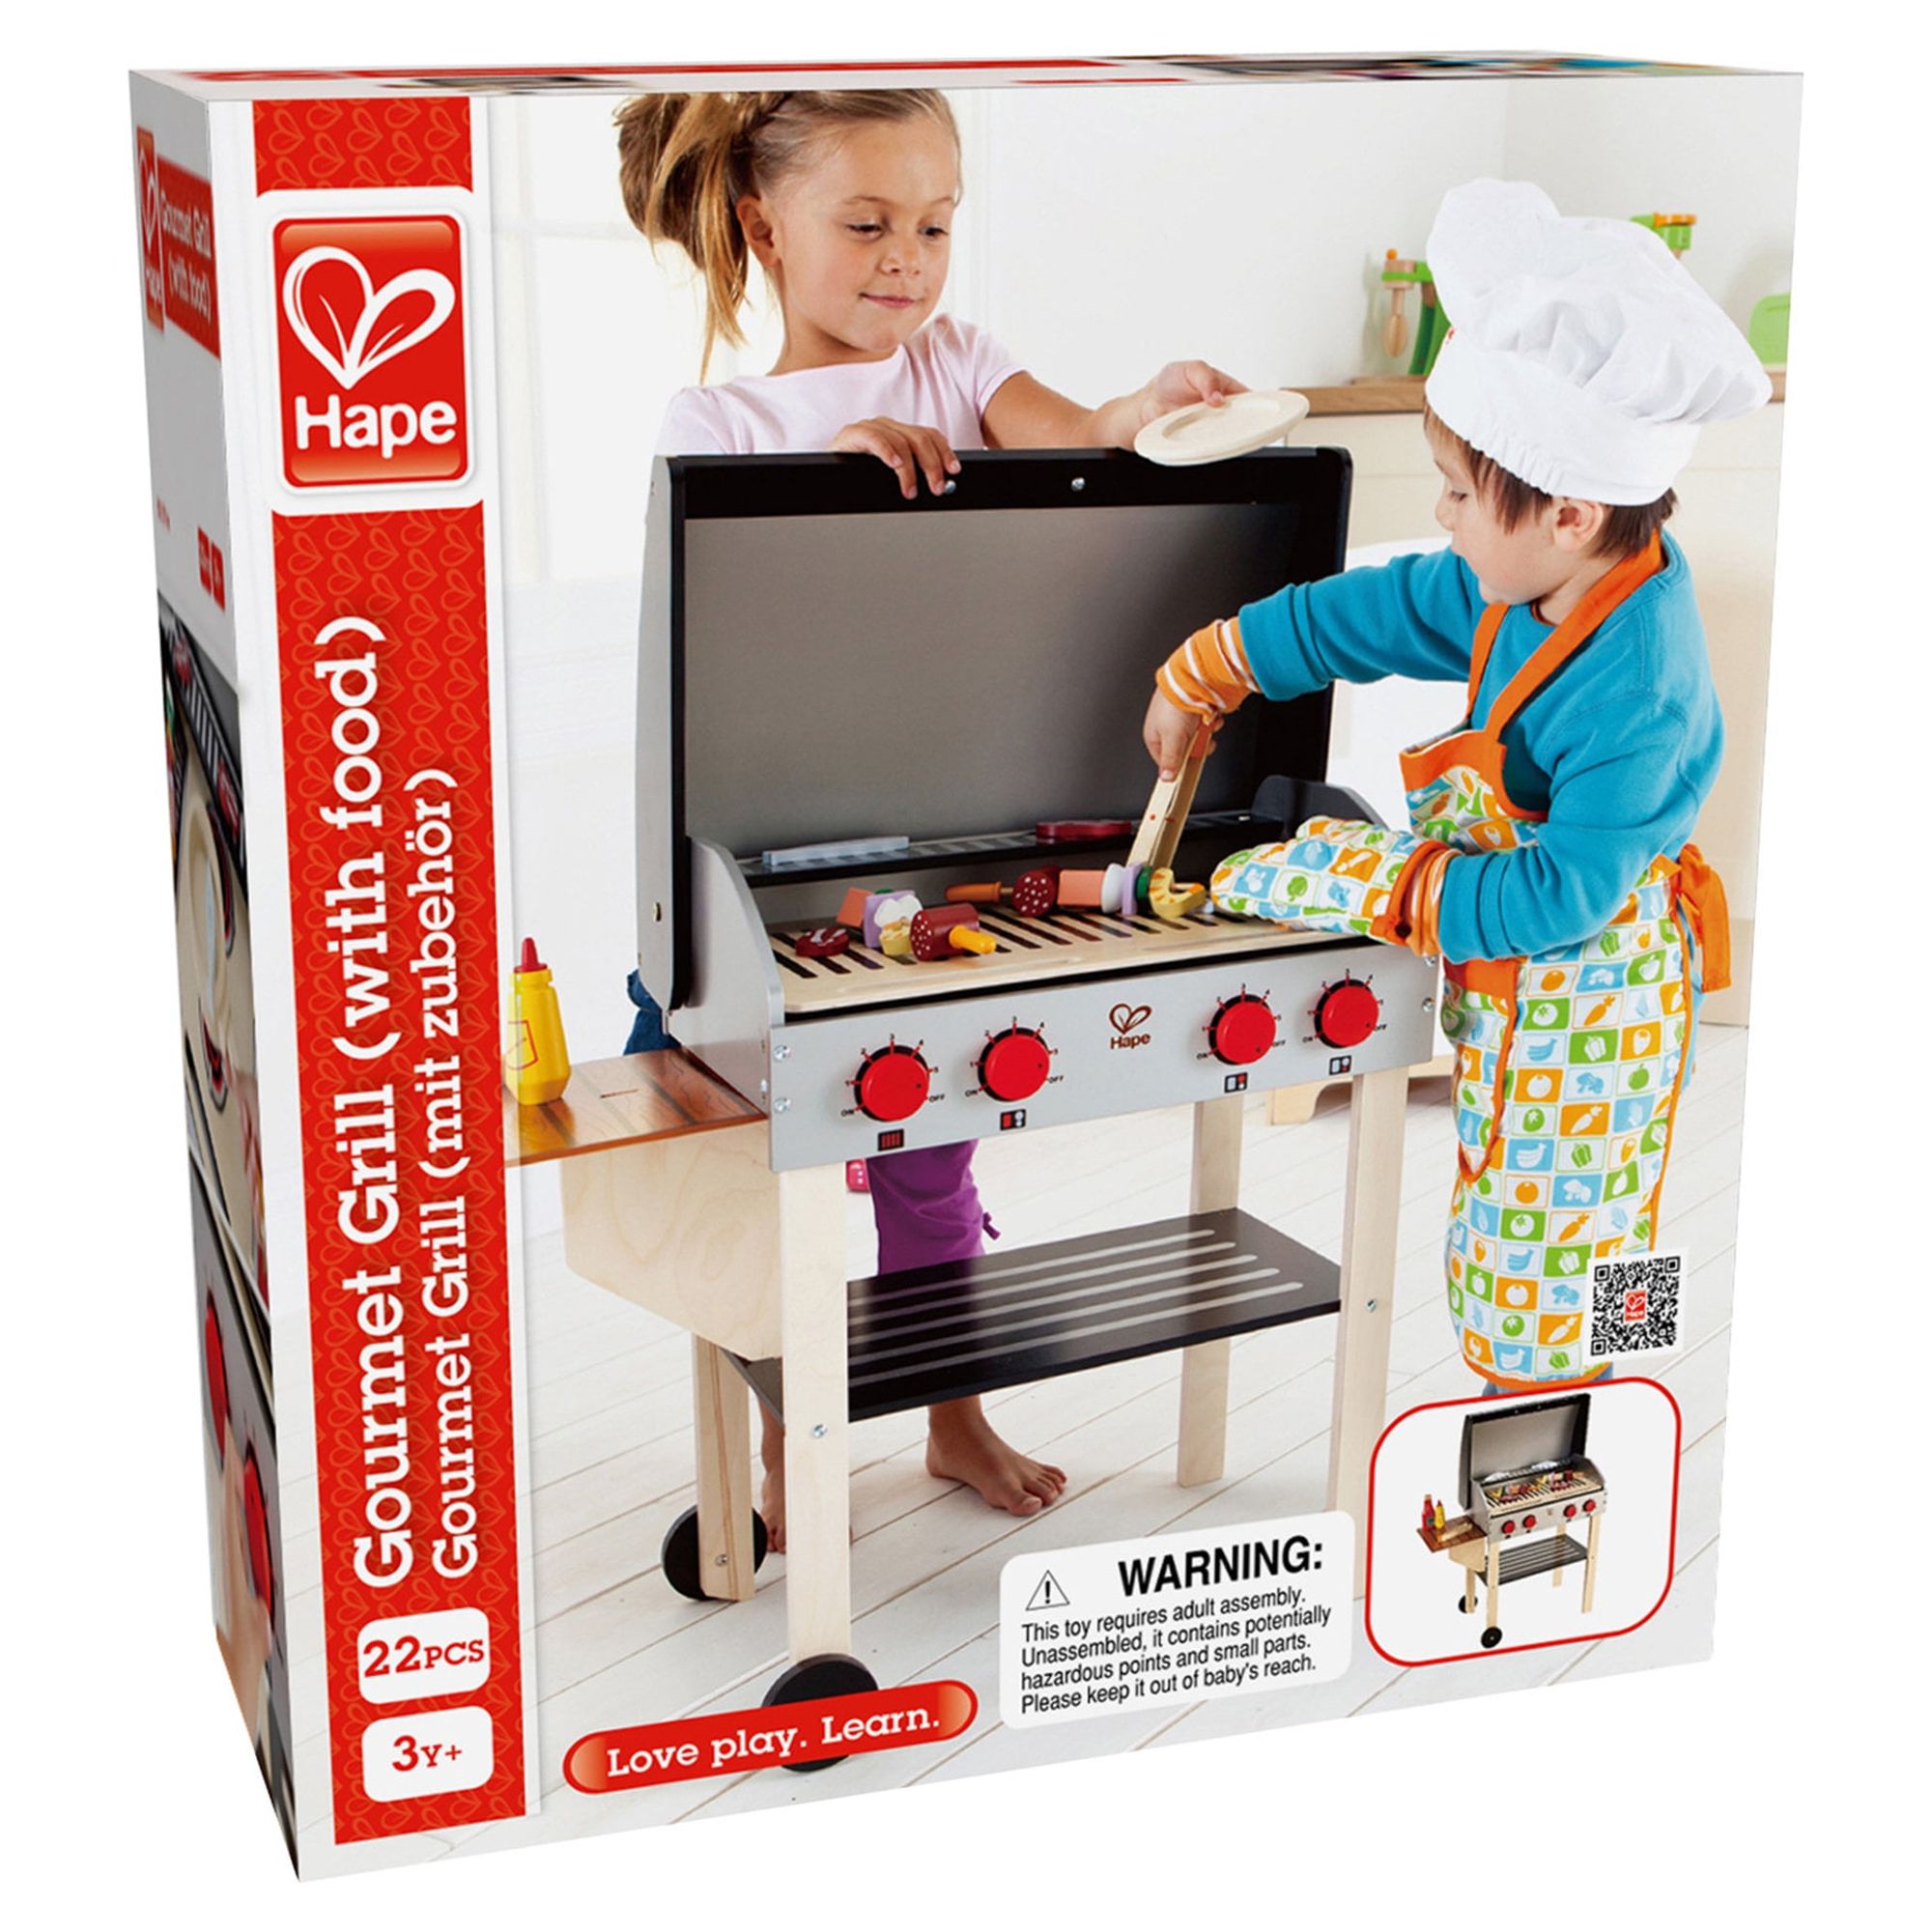 Hape Gourmet Grill Wooden Play Kitchen & Food Accessories, 22 Pieces - image 4 of 7